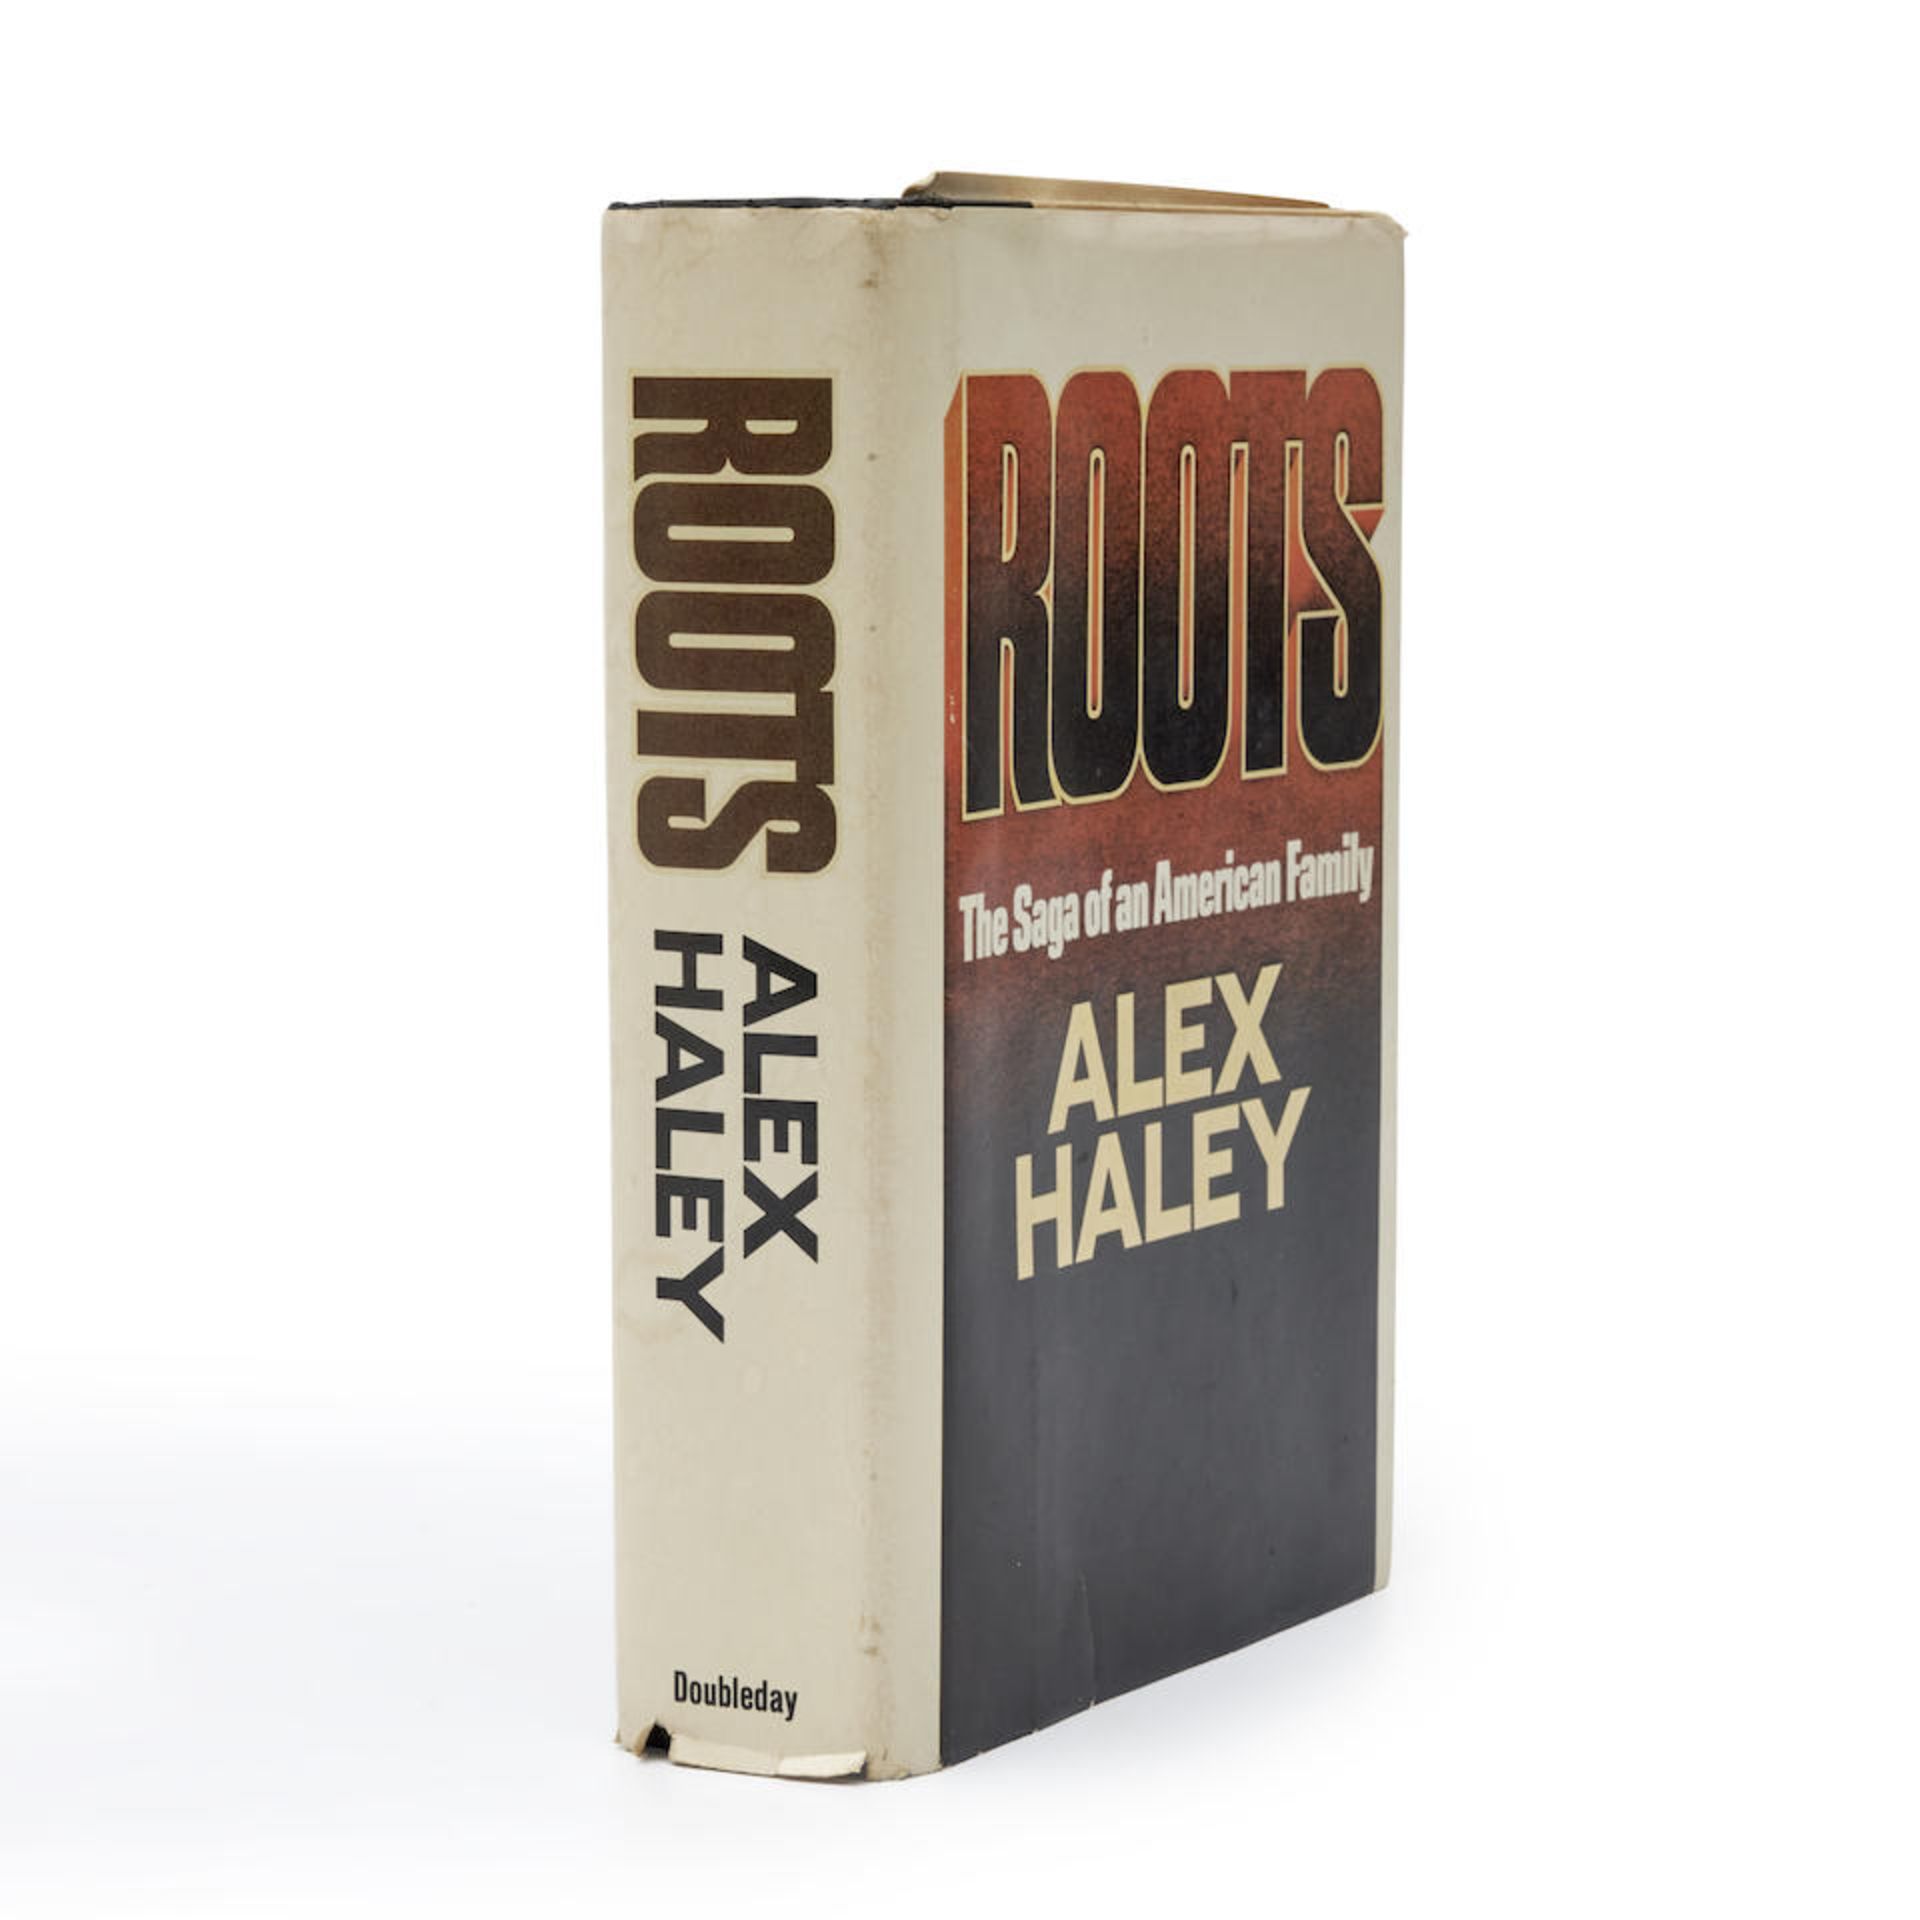 HALEY, ALEX. 1921-1992. Roots: The Saga of an American Family. Garden City, N.Y.: Doubleday & Co...